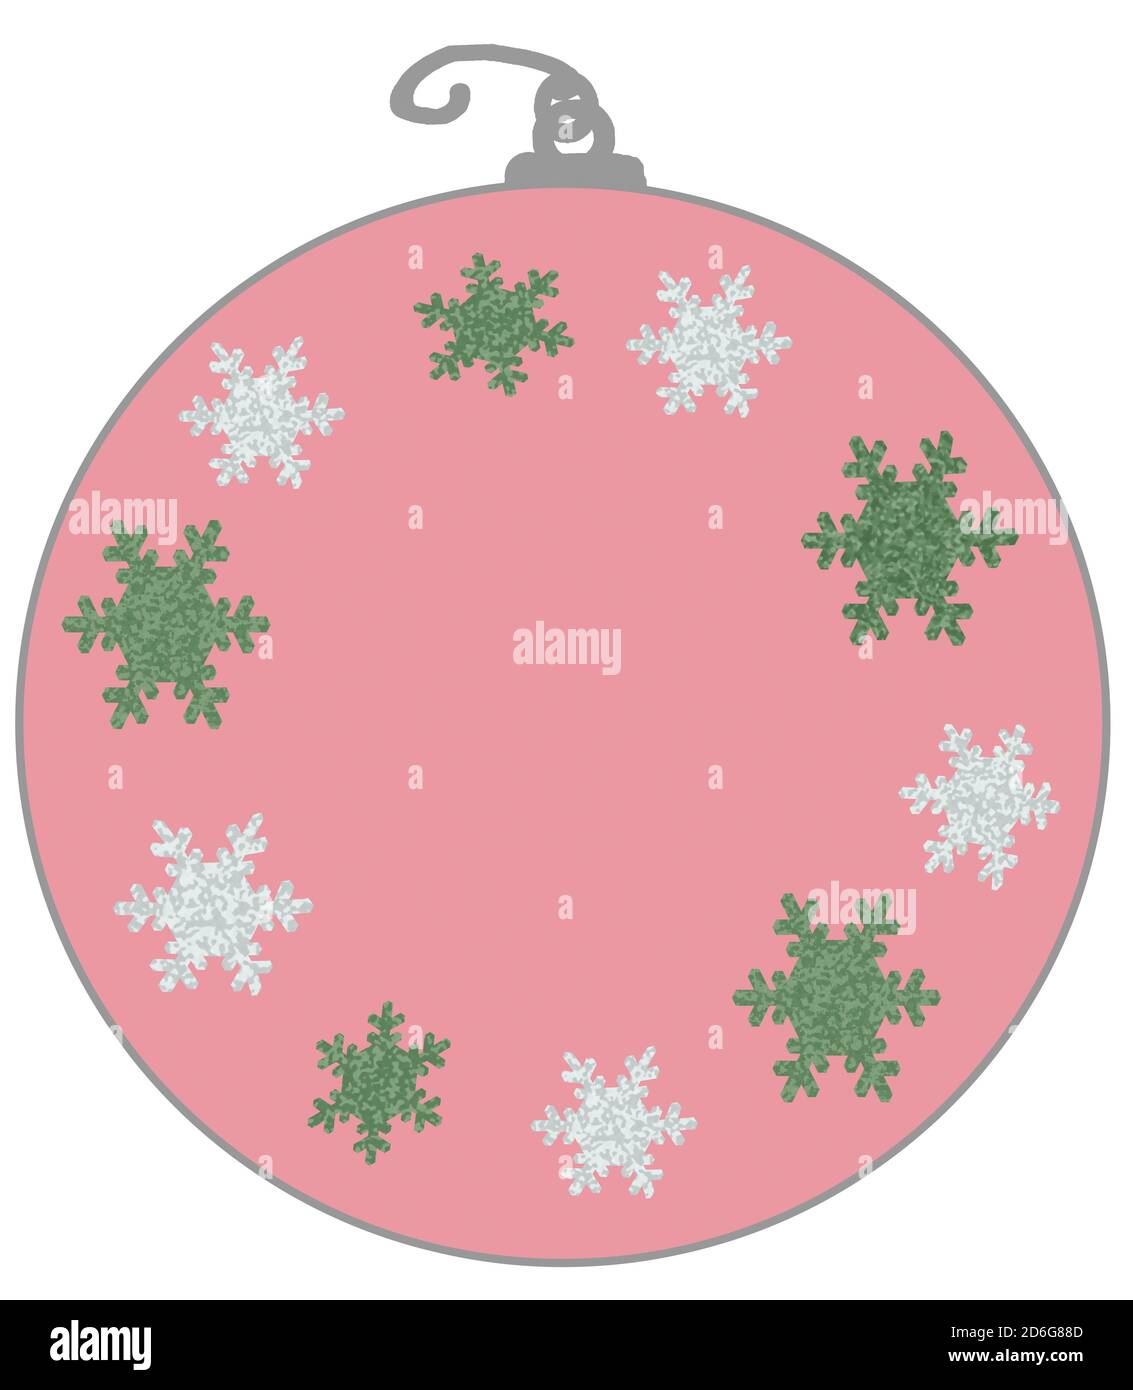 Silver and pastel pink Christmas decoration hand drawn style with snowflakes illustration. Stock Photo